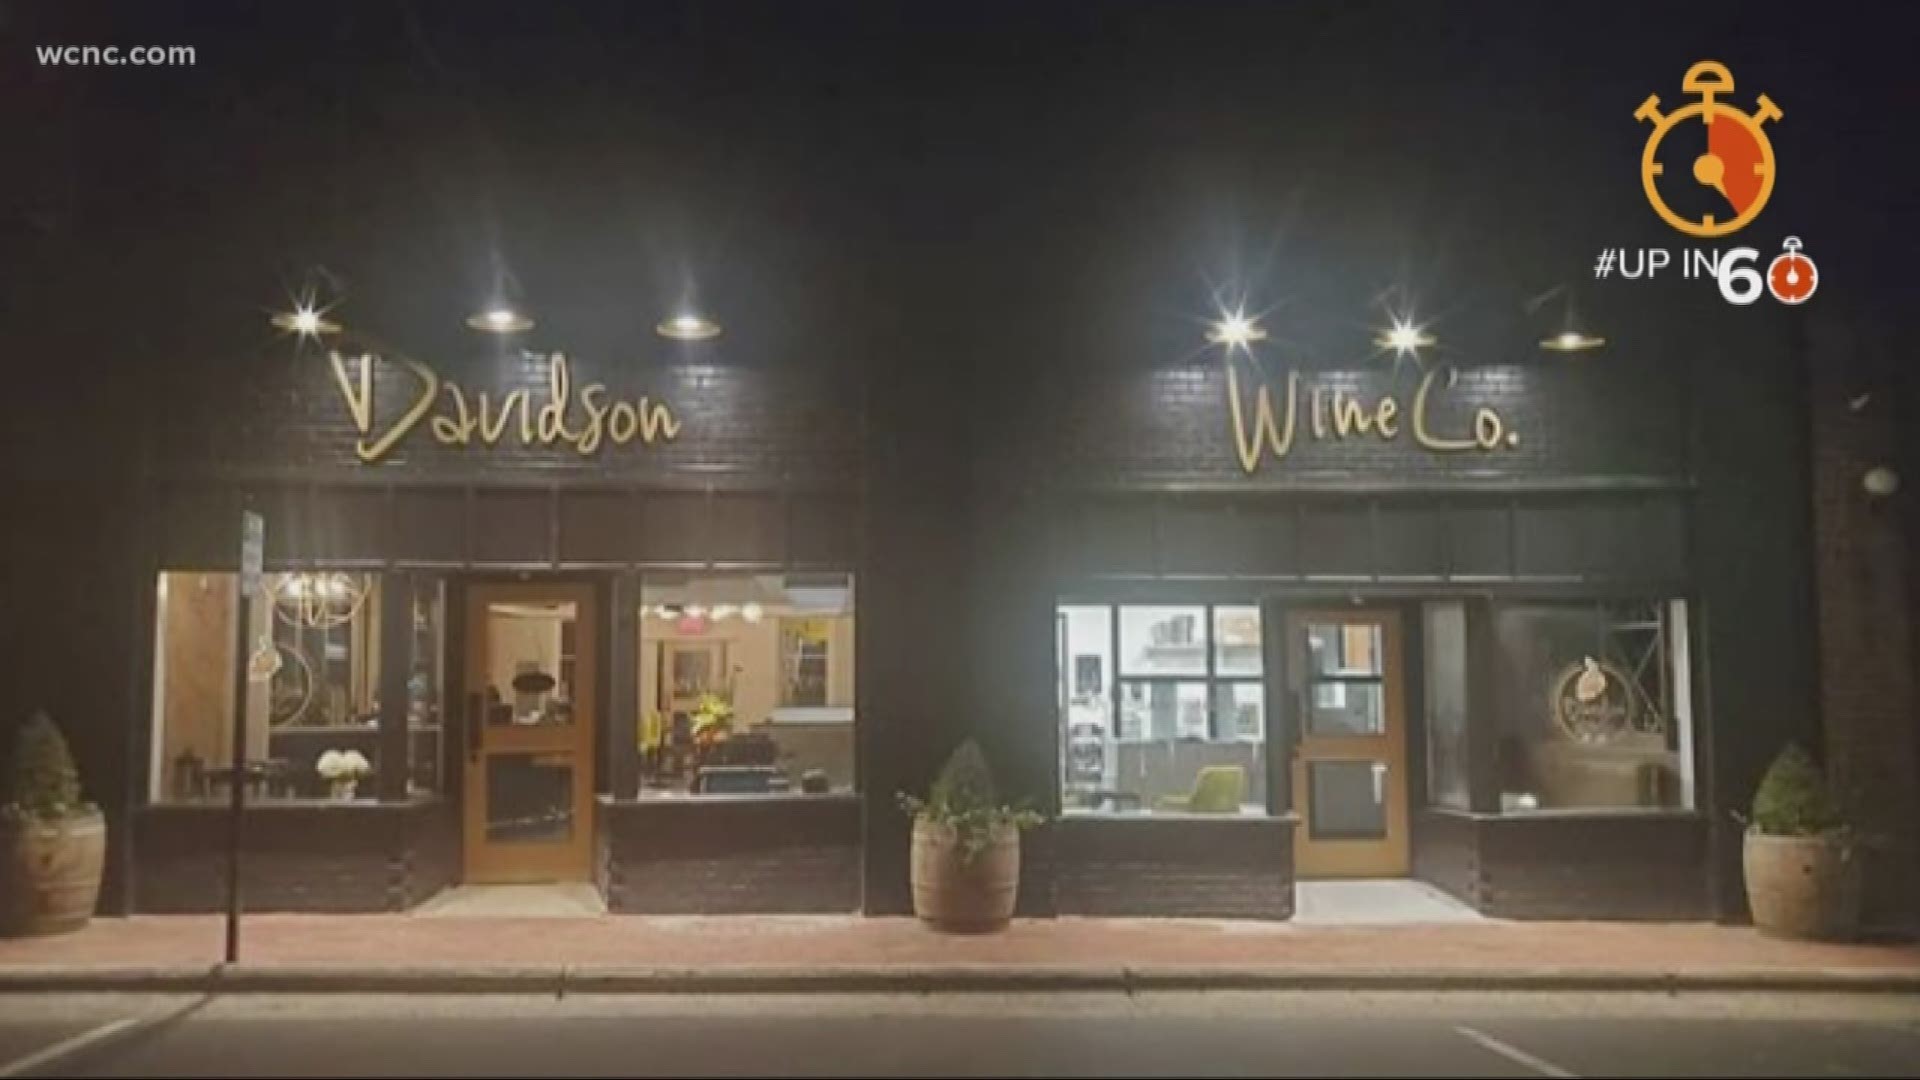 Most of the time, when you think about a winery, you picture a vineyard. But Davidson Wine Co., just north of Charlotte, is changing that with their new shop that offers custom wines, tastings and bottling parties.